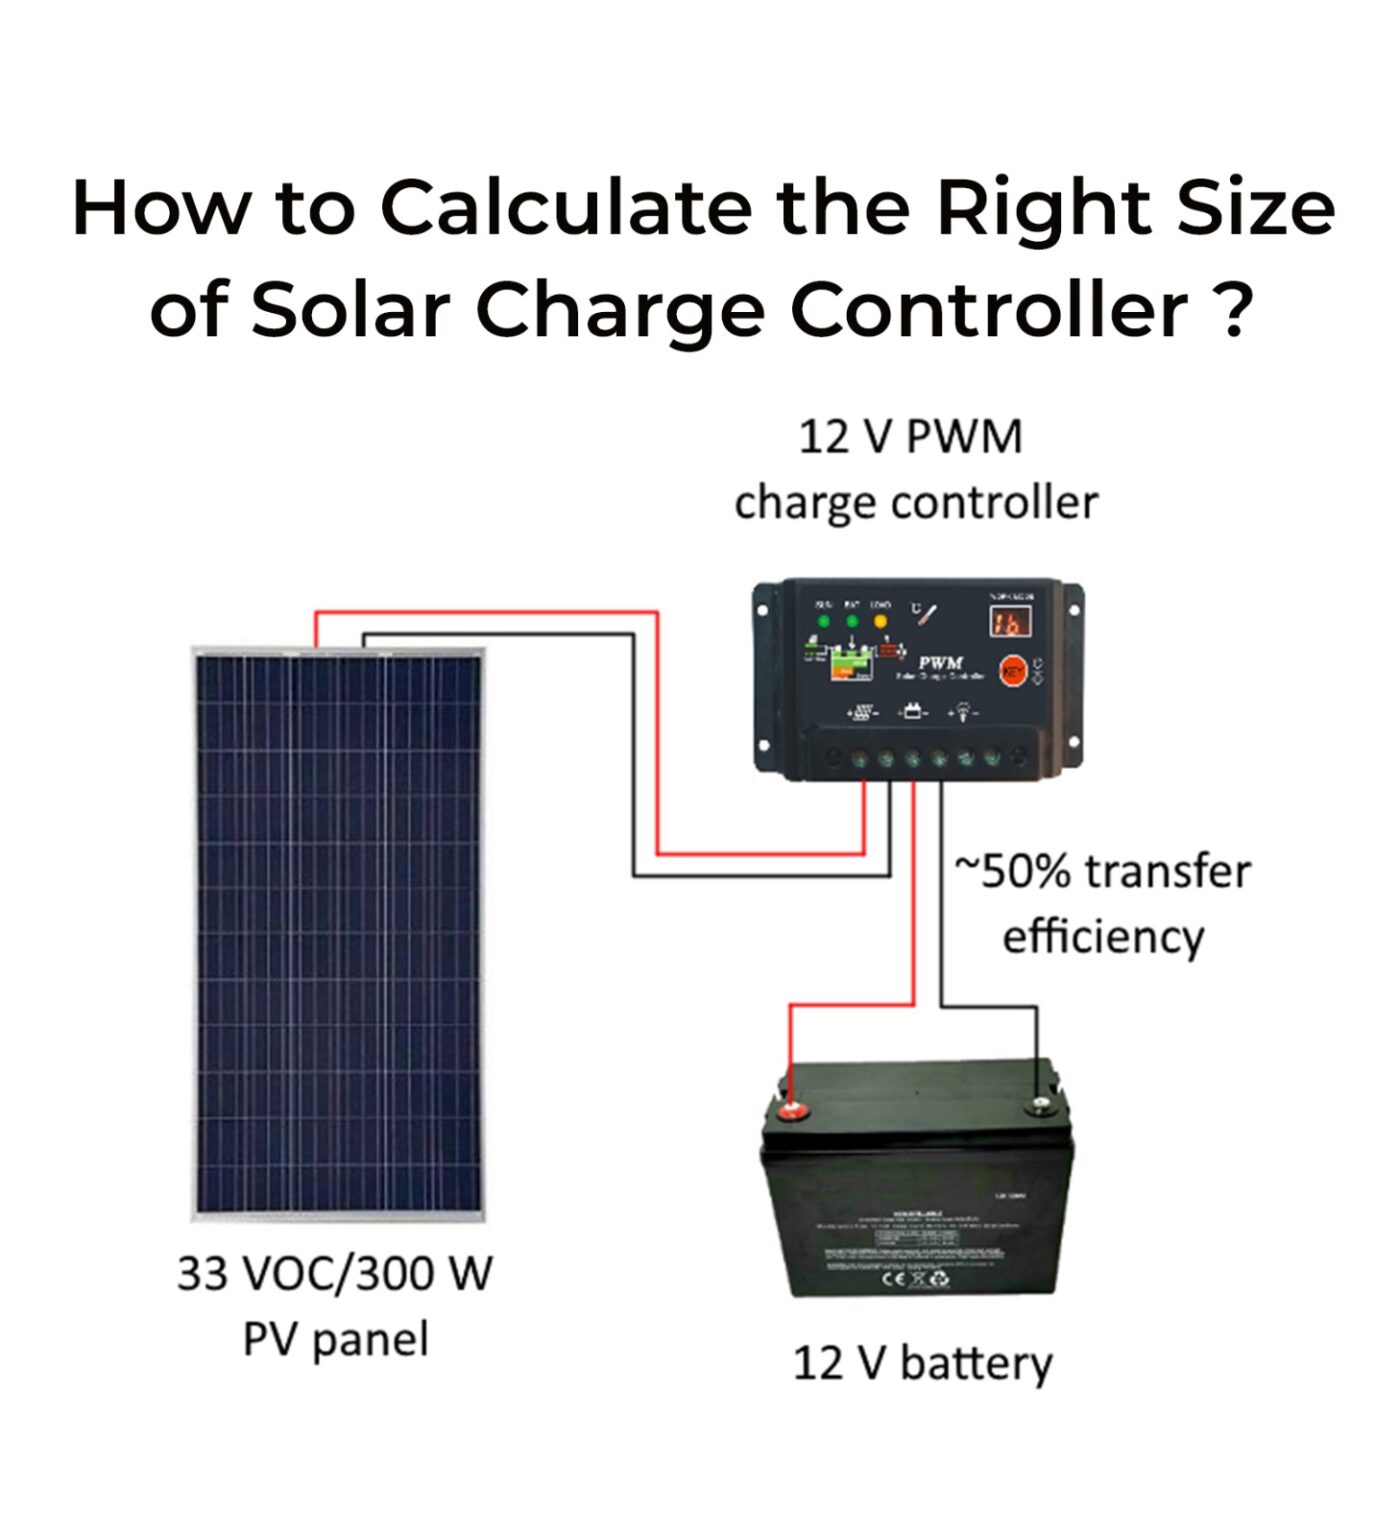 How to Calculate the Right Size of Solar Charge Controller?